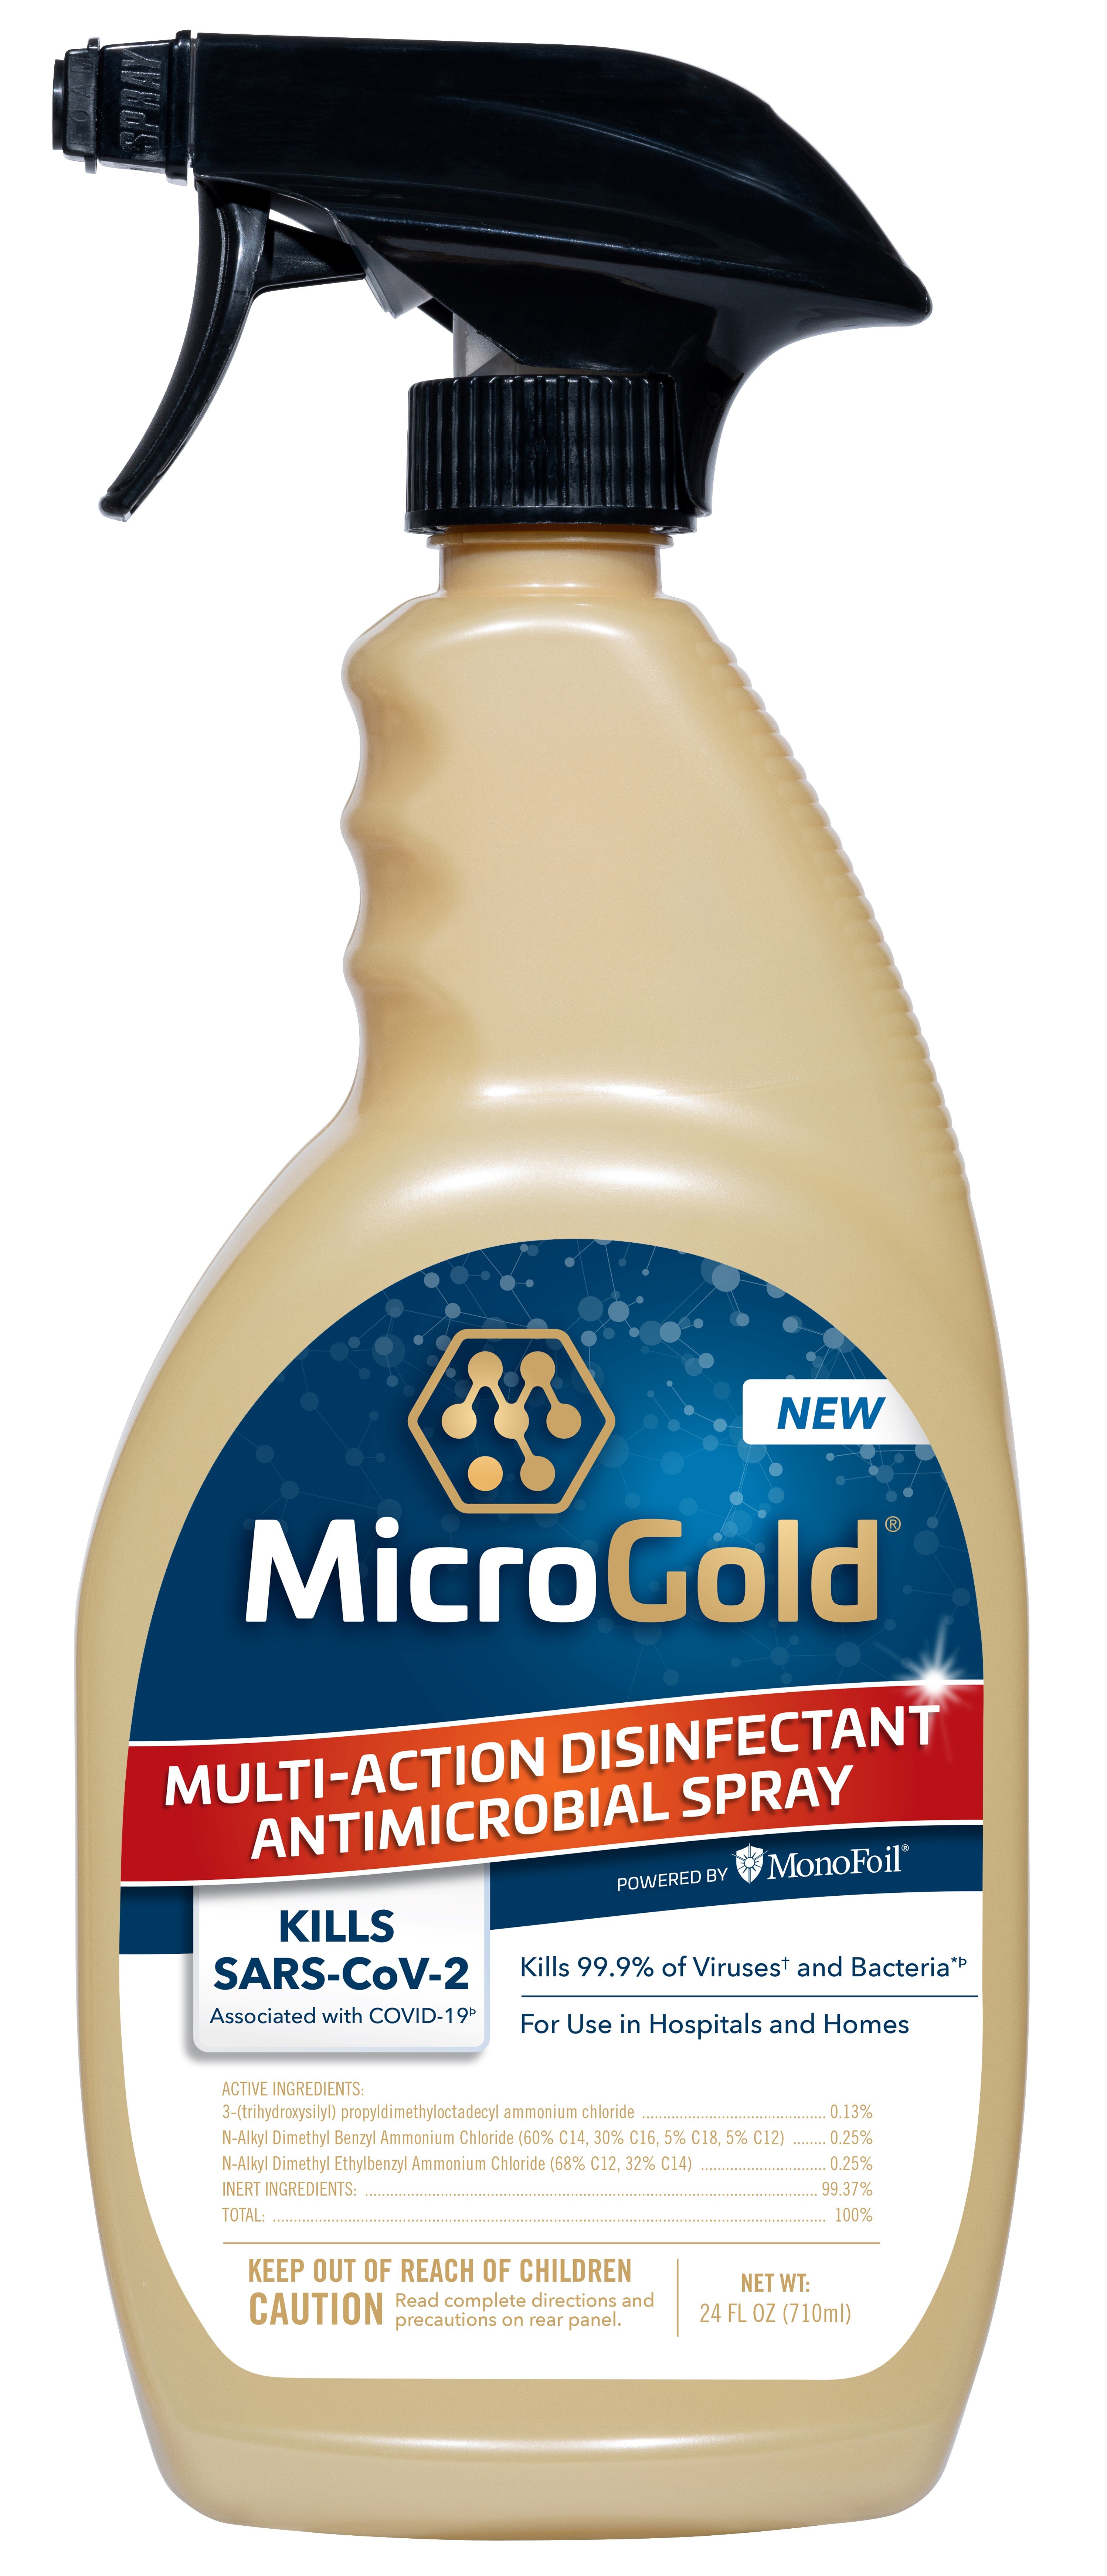 MicroGold Multi-Action Disinfectant Antimicrobial Spray, 24 OZ